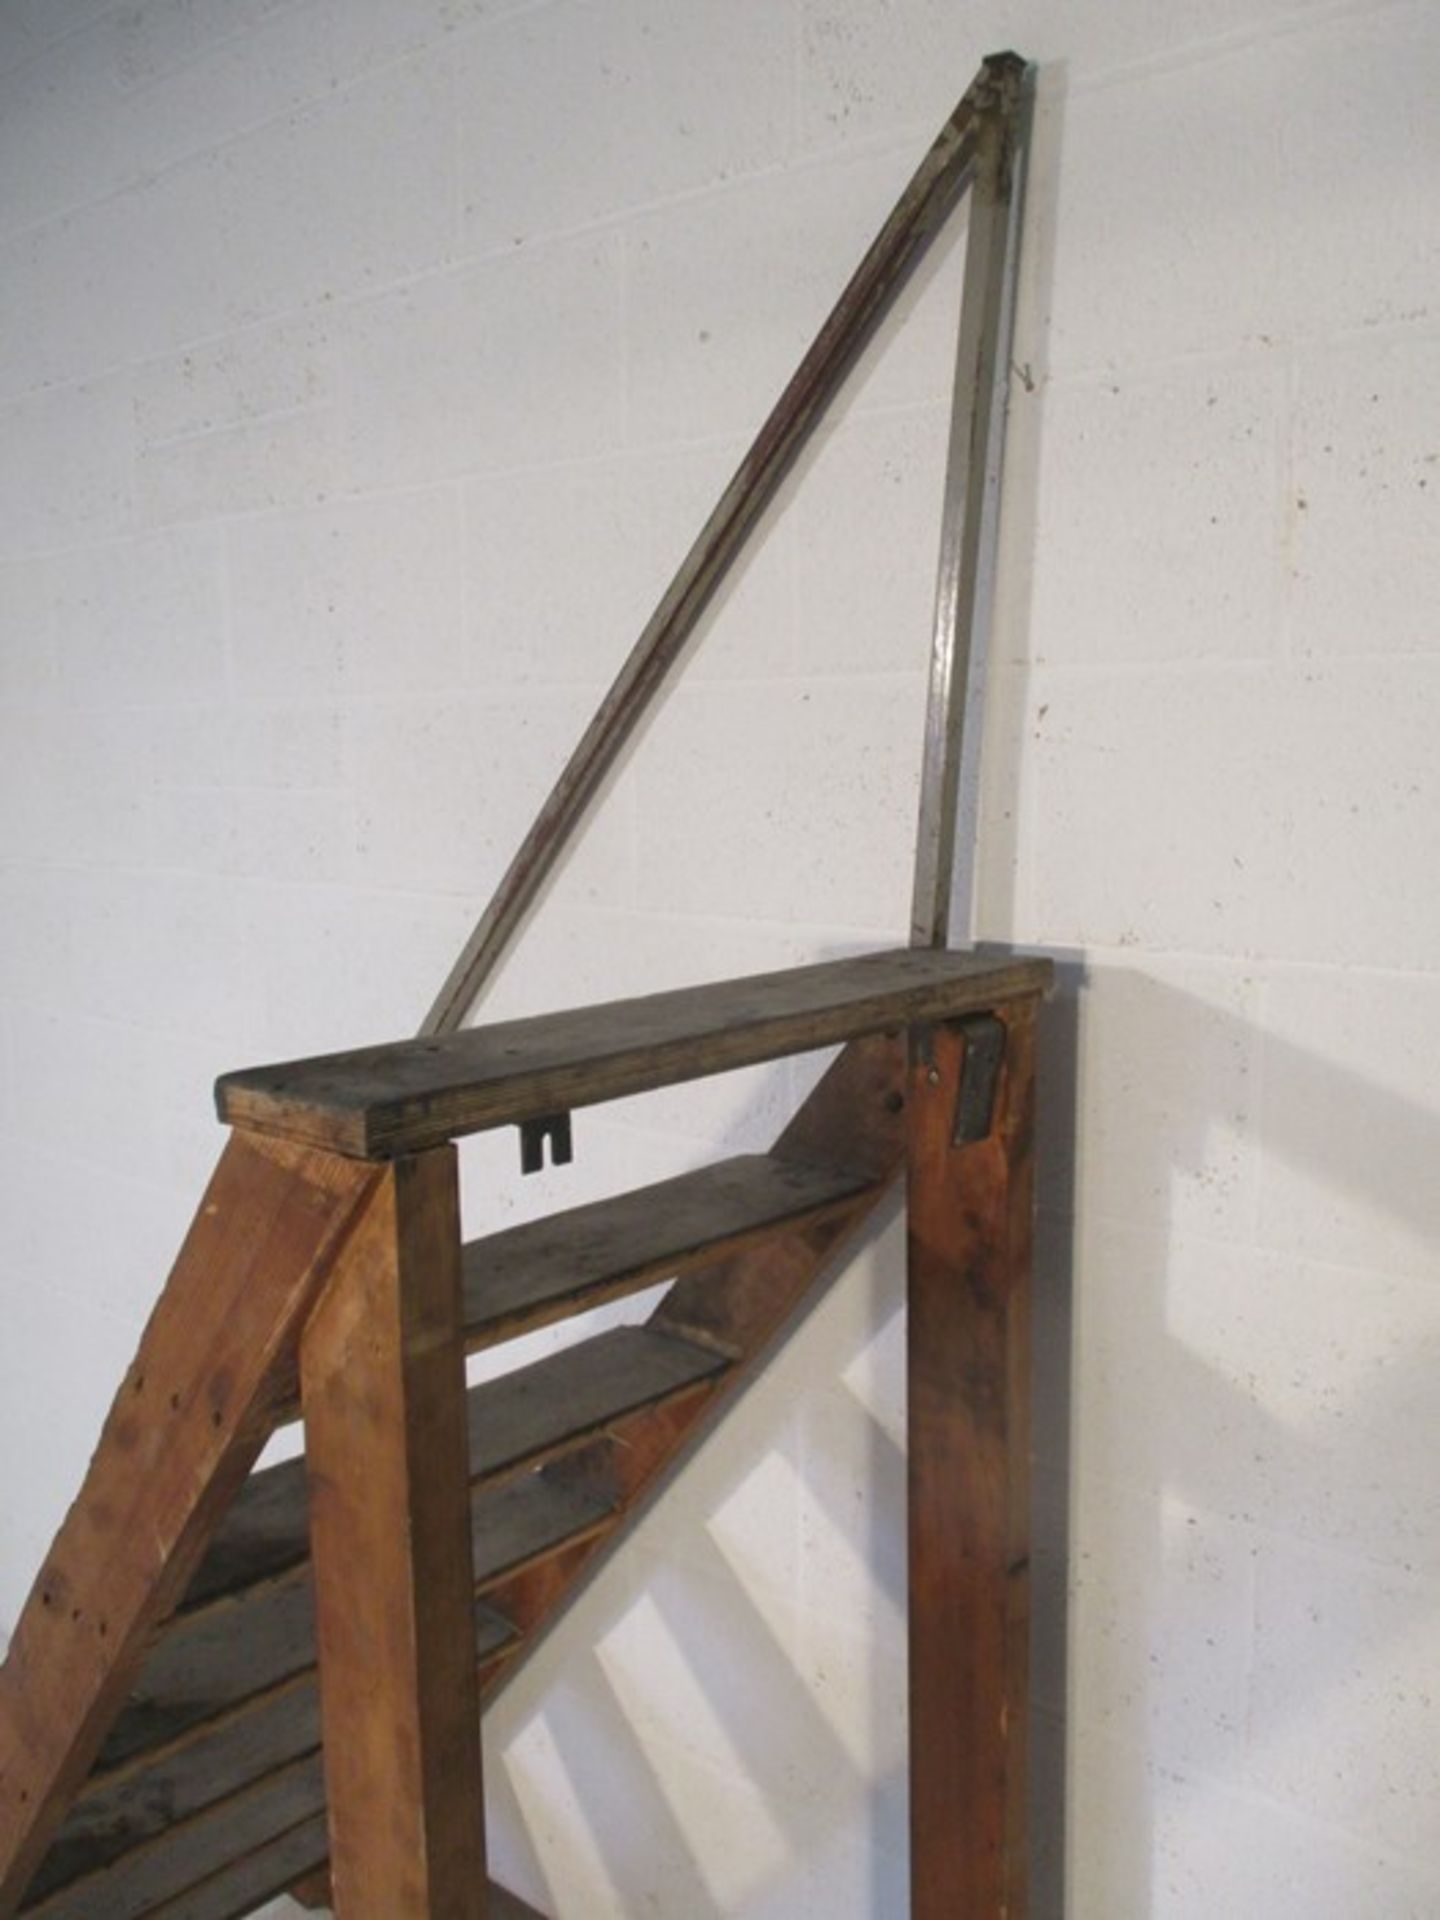 A set of industrial steps with rail, overall height 208 cm - Image 3 of 4